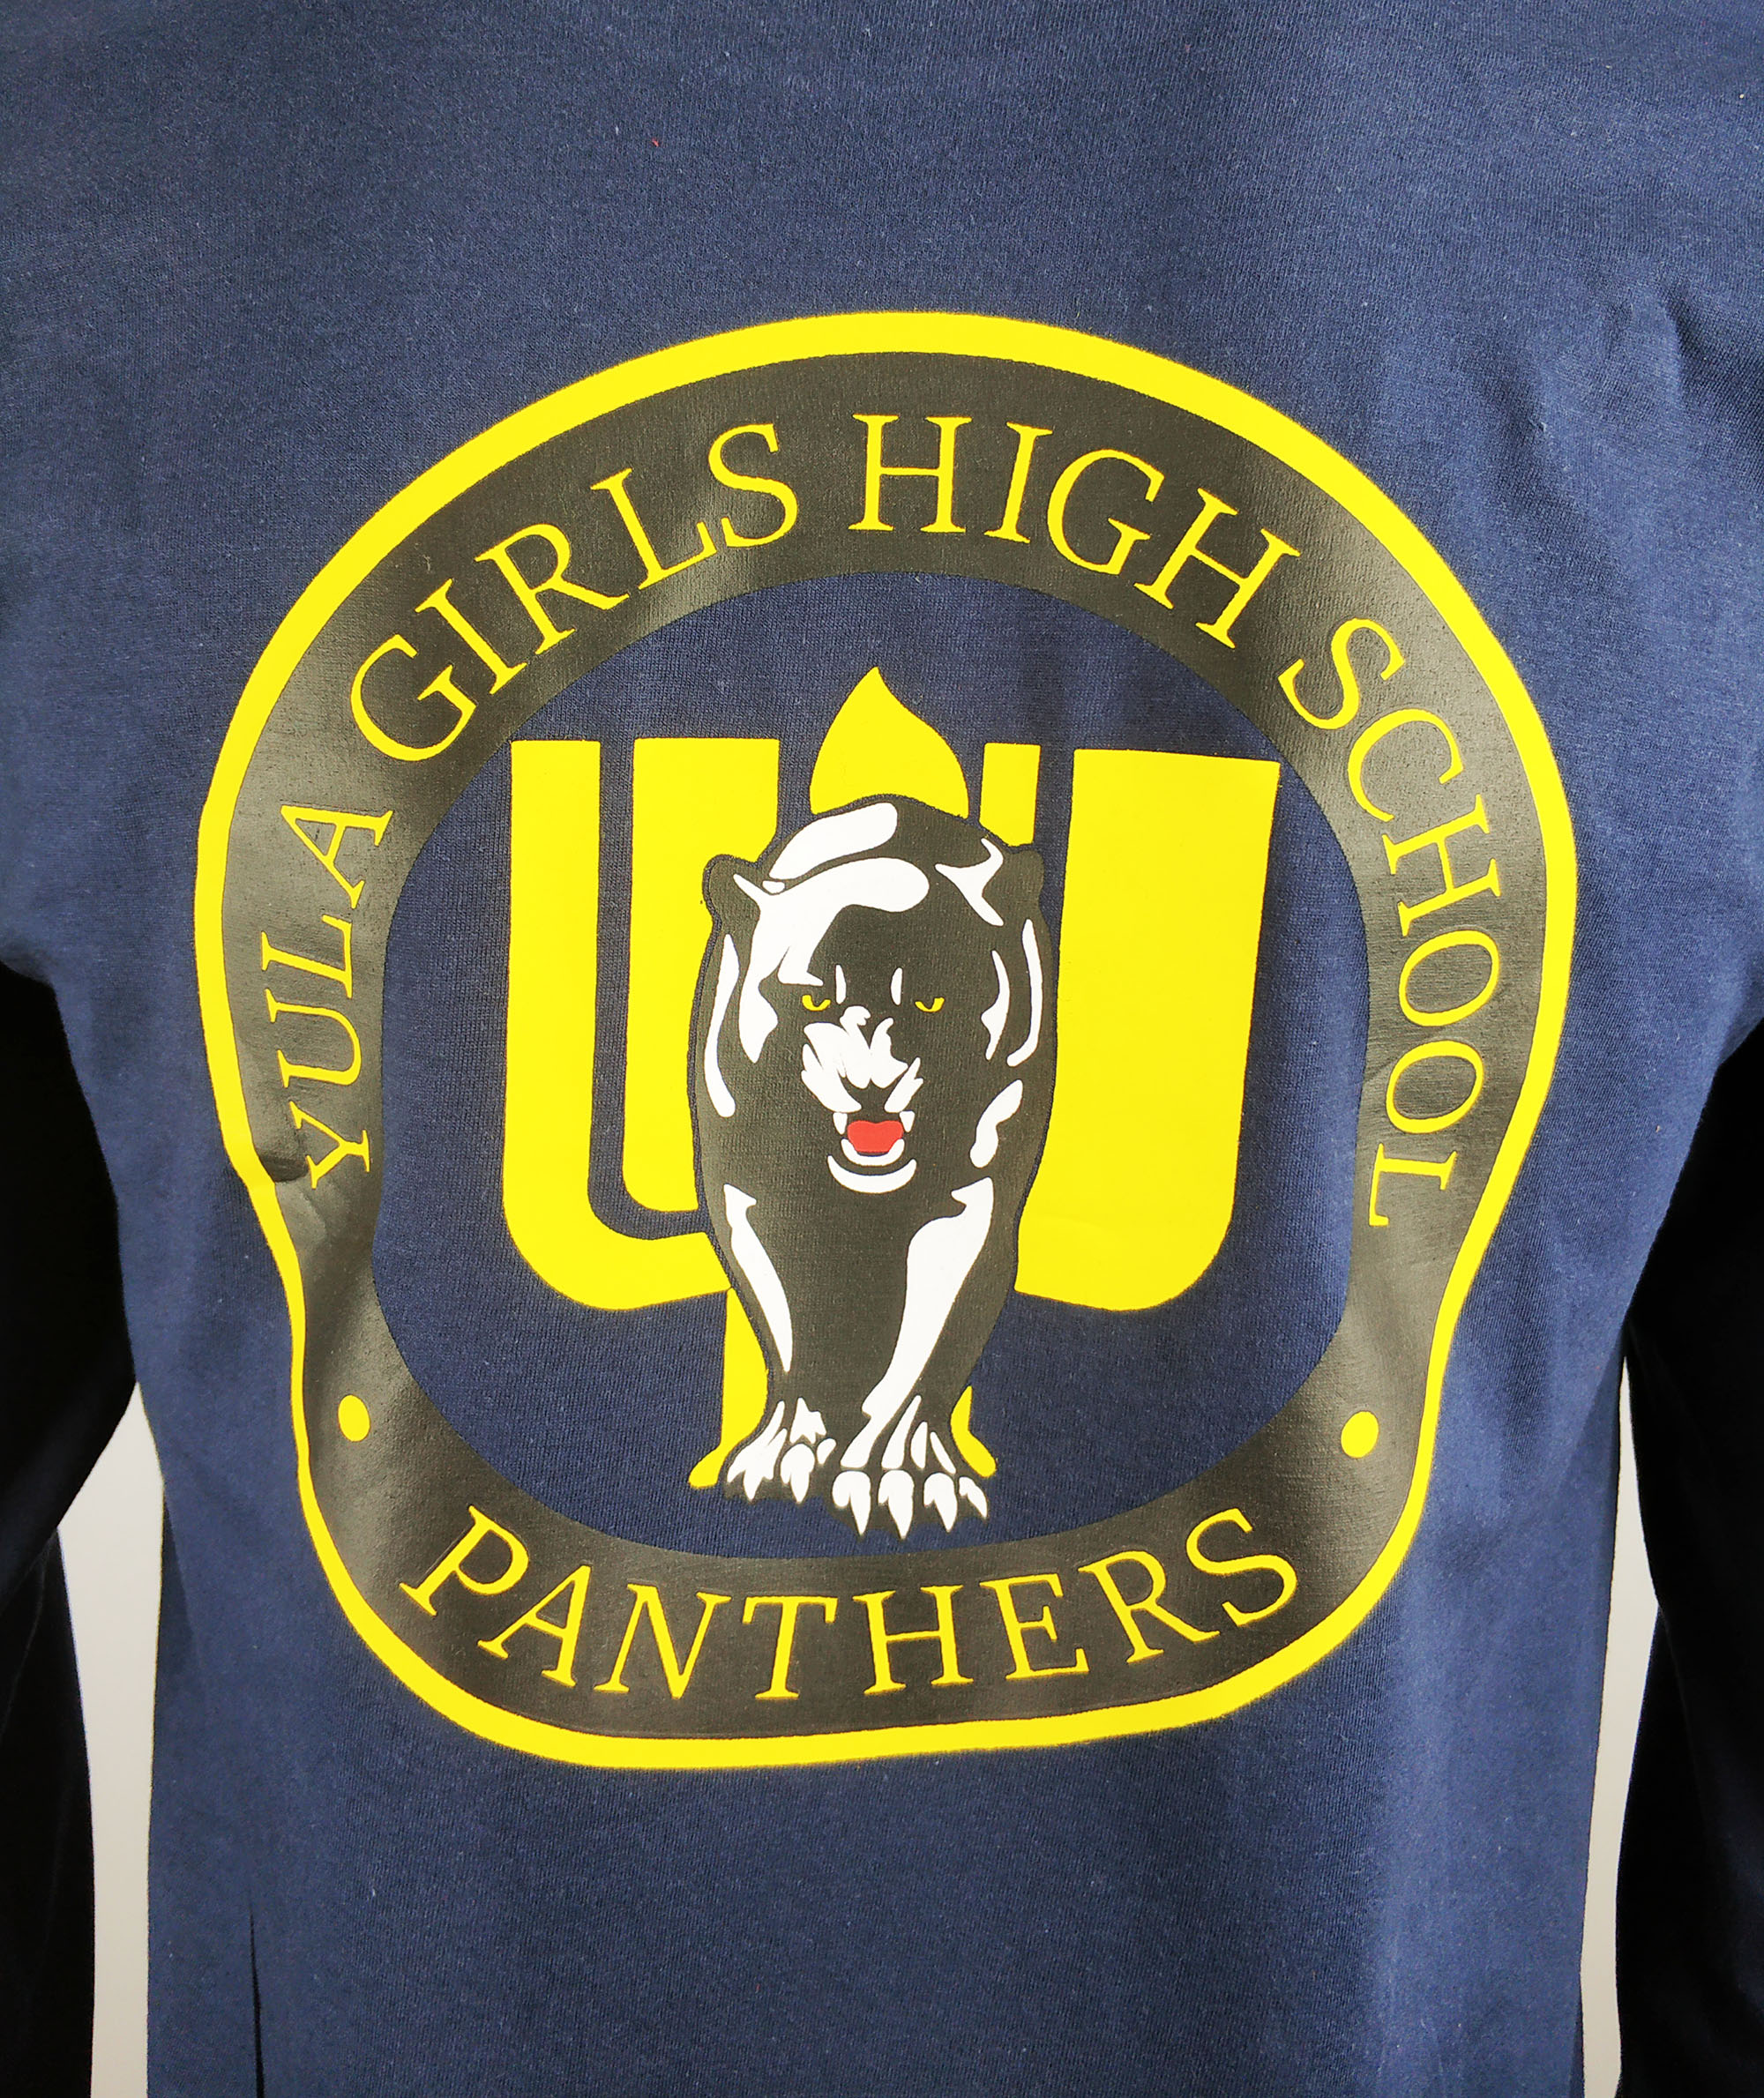 Personalized printed t-shirts for school 